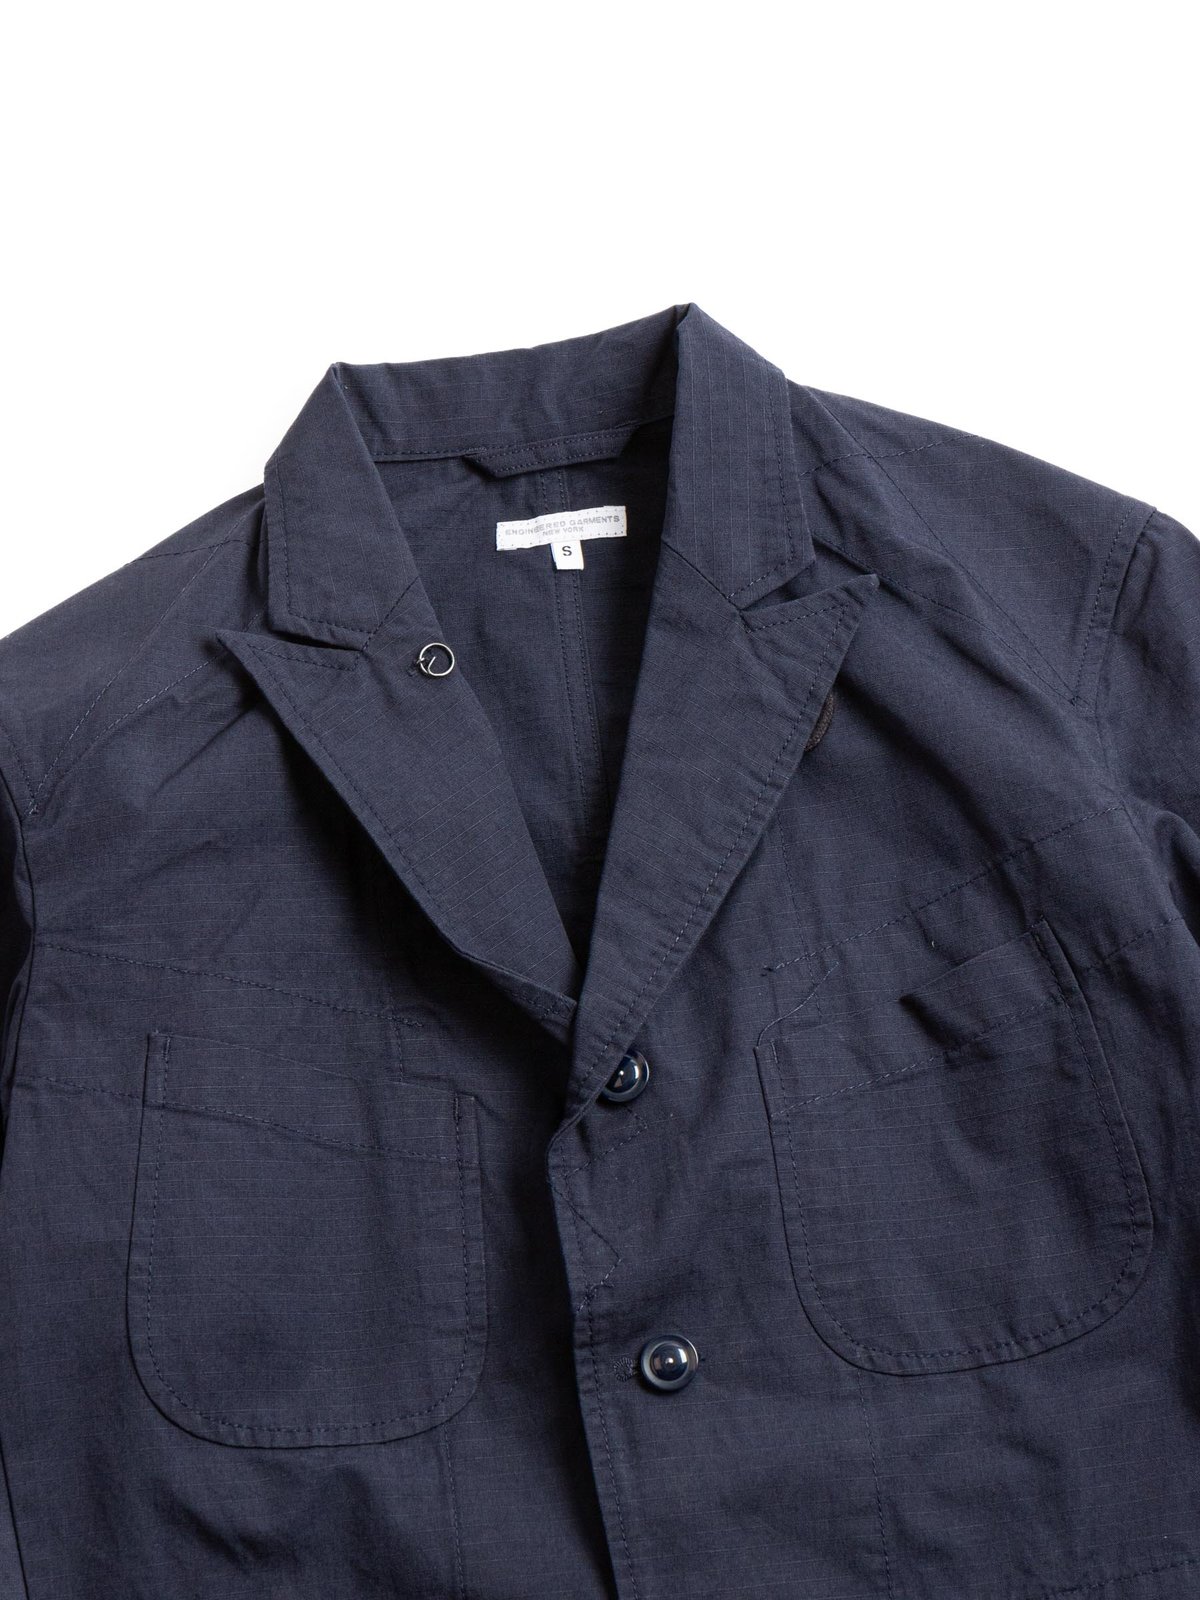 BEDFORD JACKET NAVY COTTON RIPSTOP - Image 2